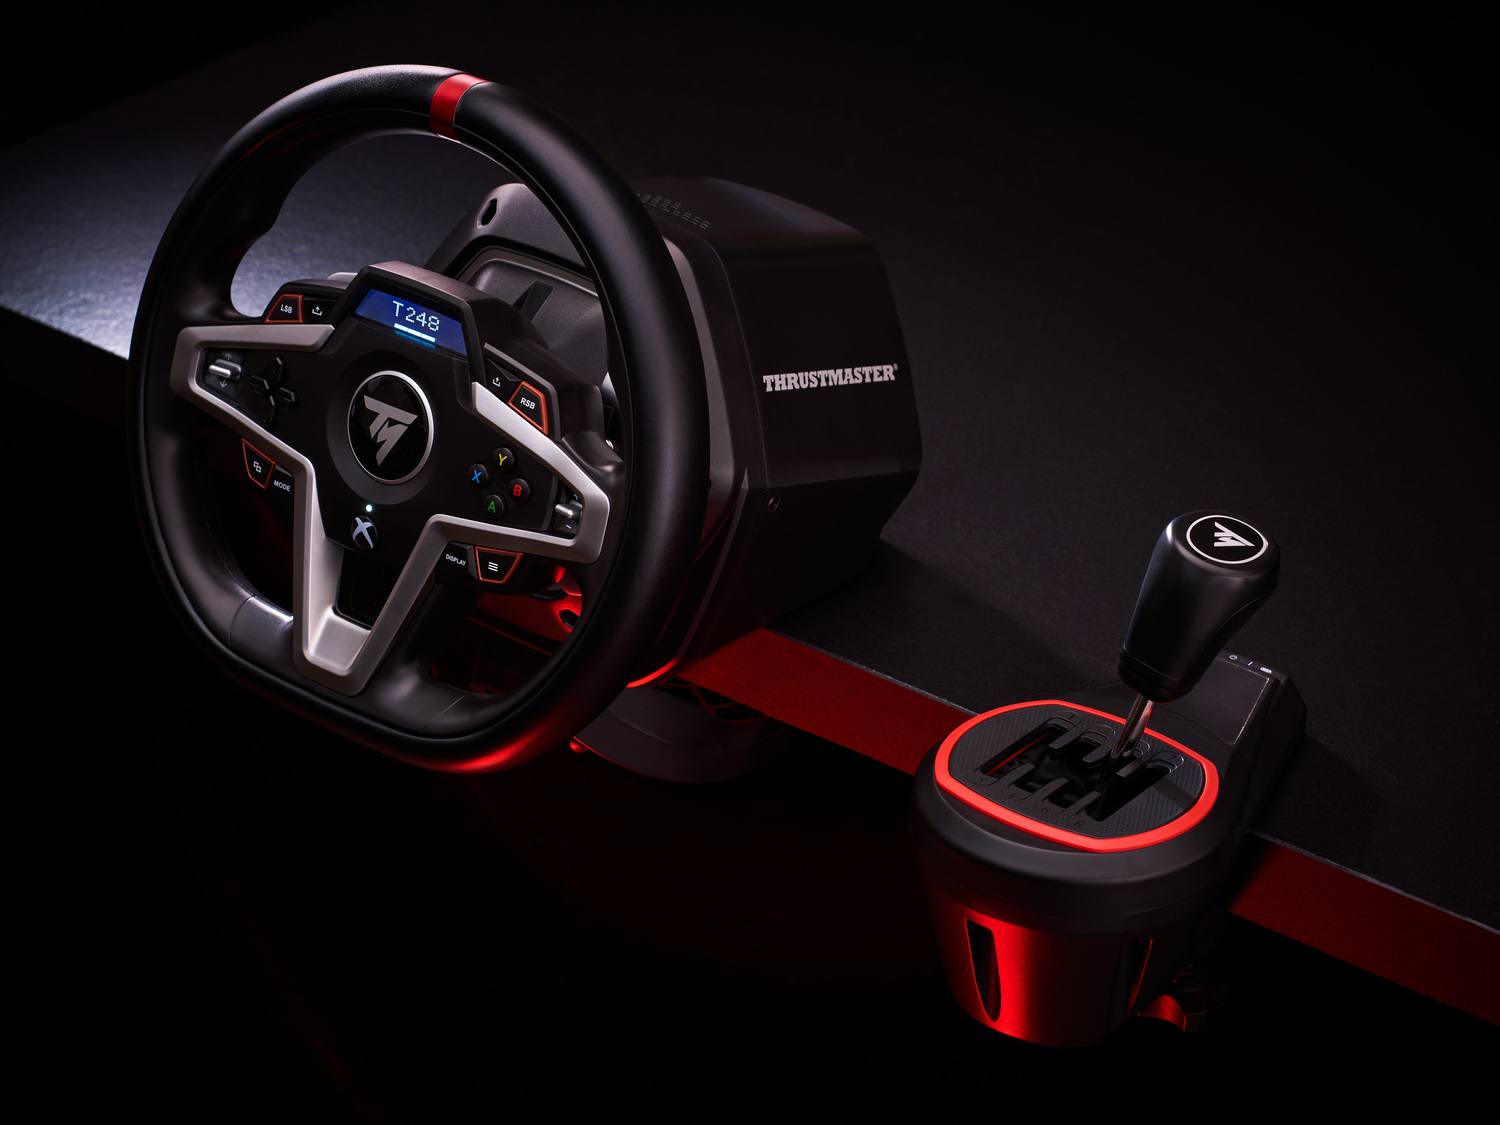 TH8S Shifter Add-On: Push your gears to the red line - Thrustmaster